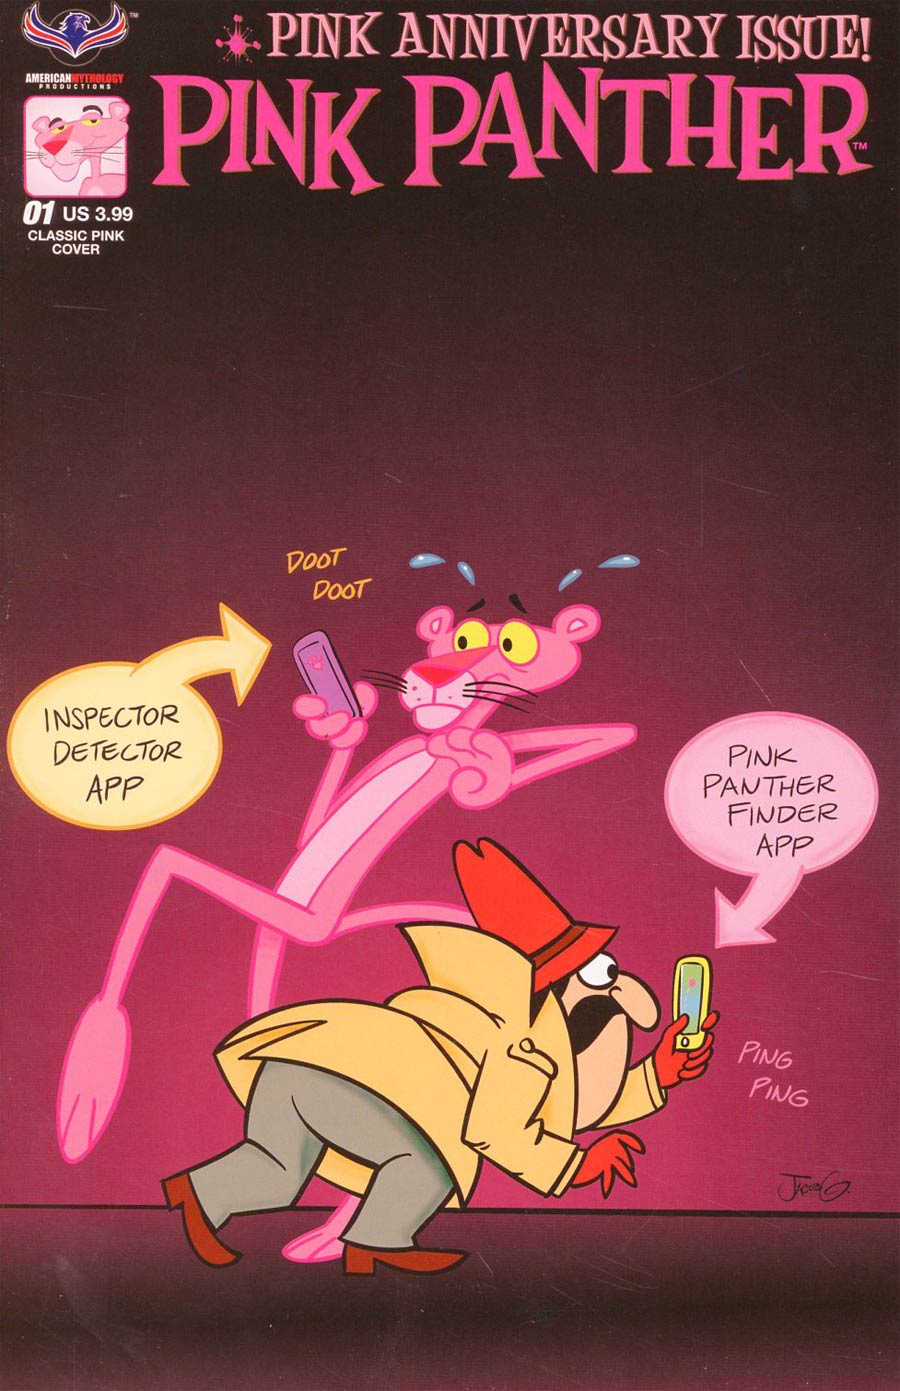 Pink Panther Pink Anniversary Cover B Variant Jacob Greenawalt Cover